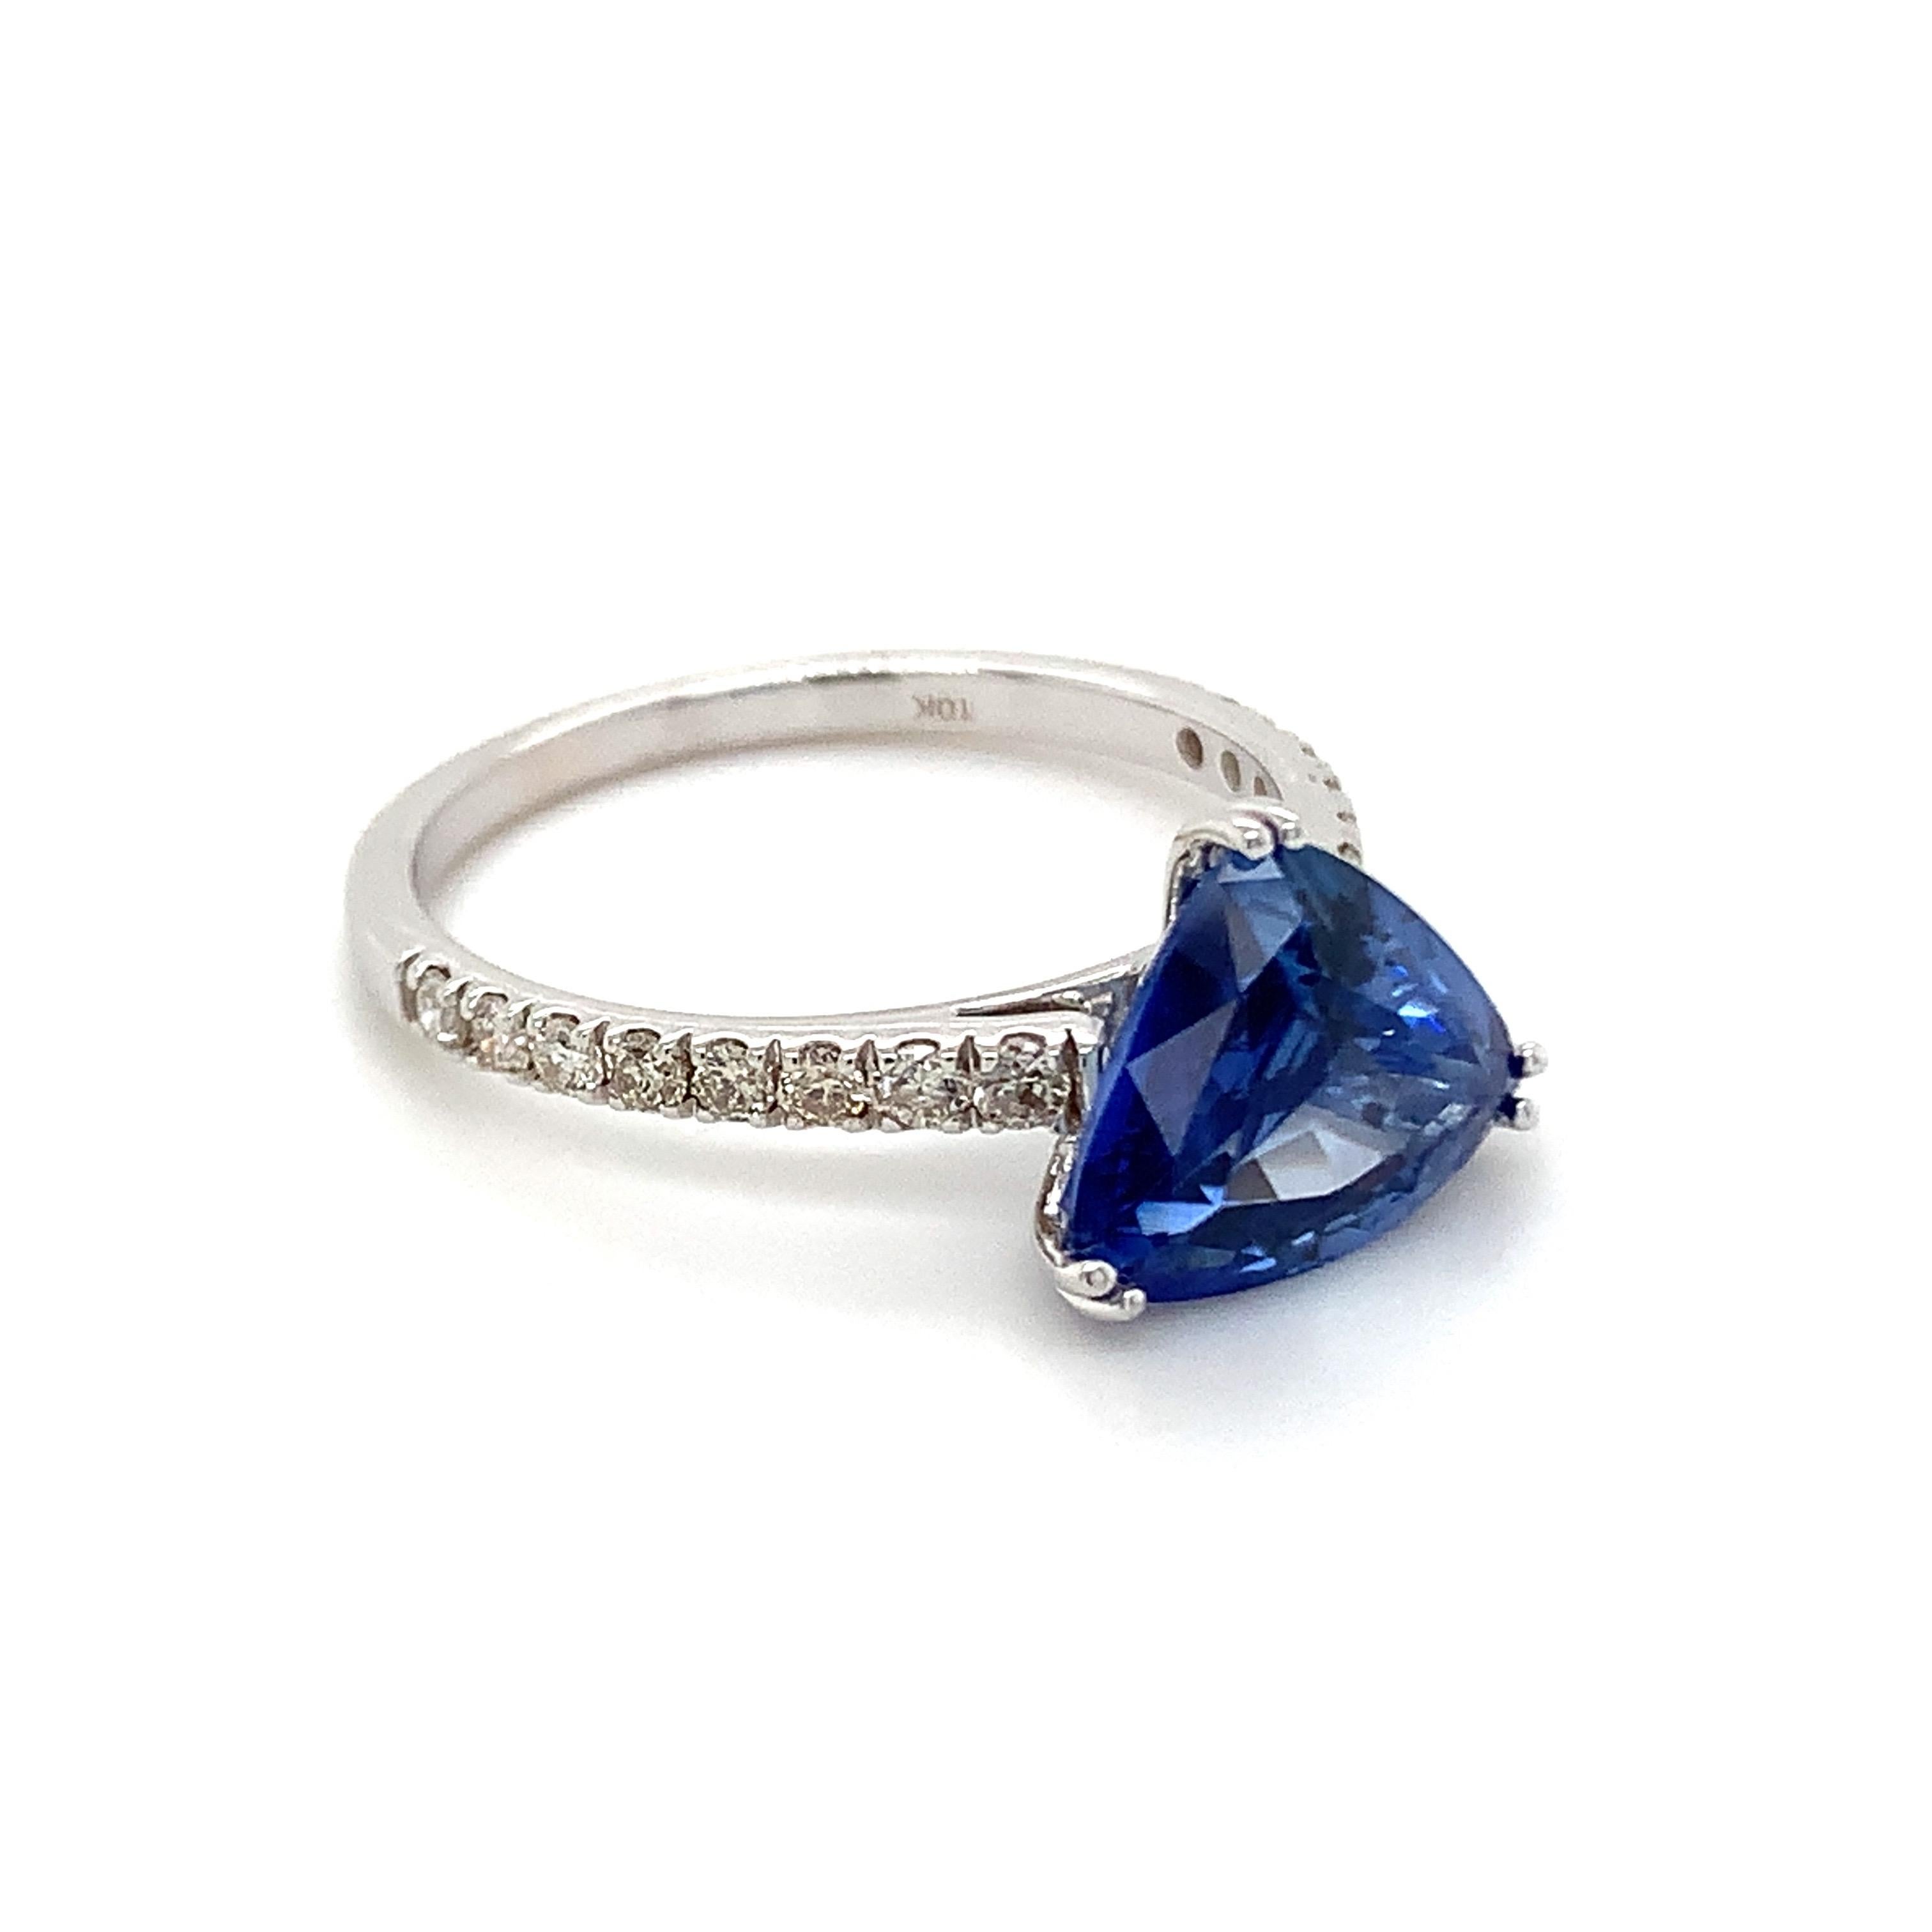 Trillion shape blue sapphire gemstone beautifully crafted in a 10K white gold ring with natural diamonds.

A highly precious September birthstone with a delighting blue color. They are believed to bring good luck & fortune in life. Explore a vast